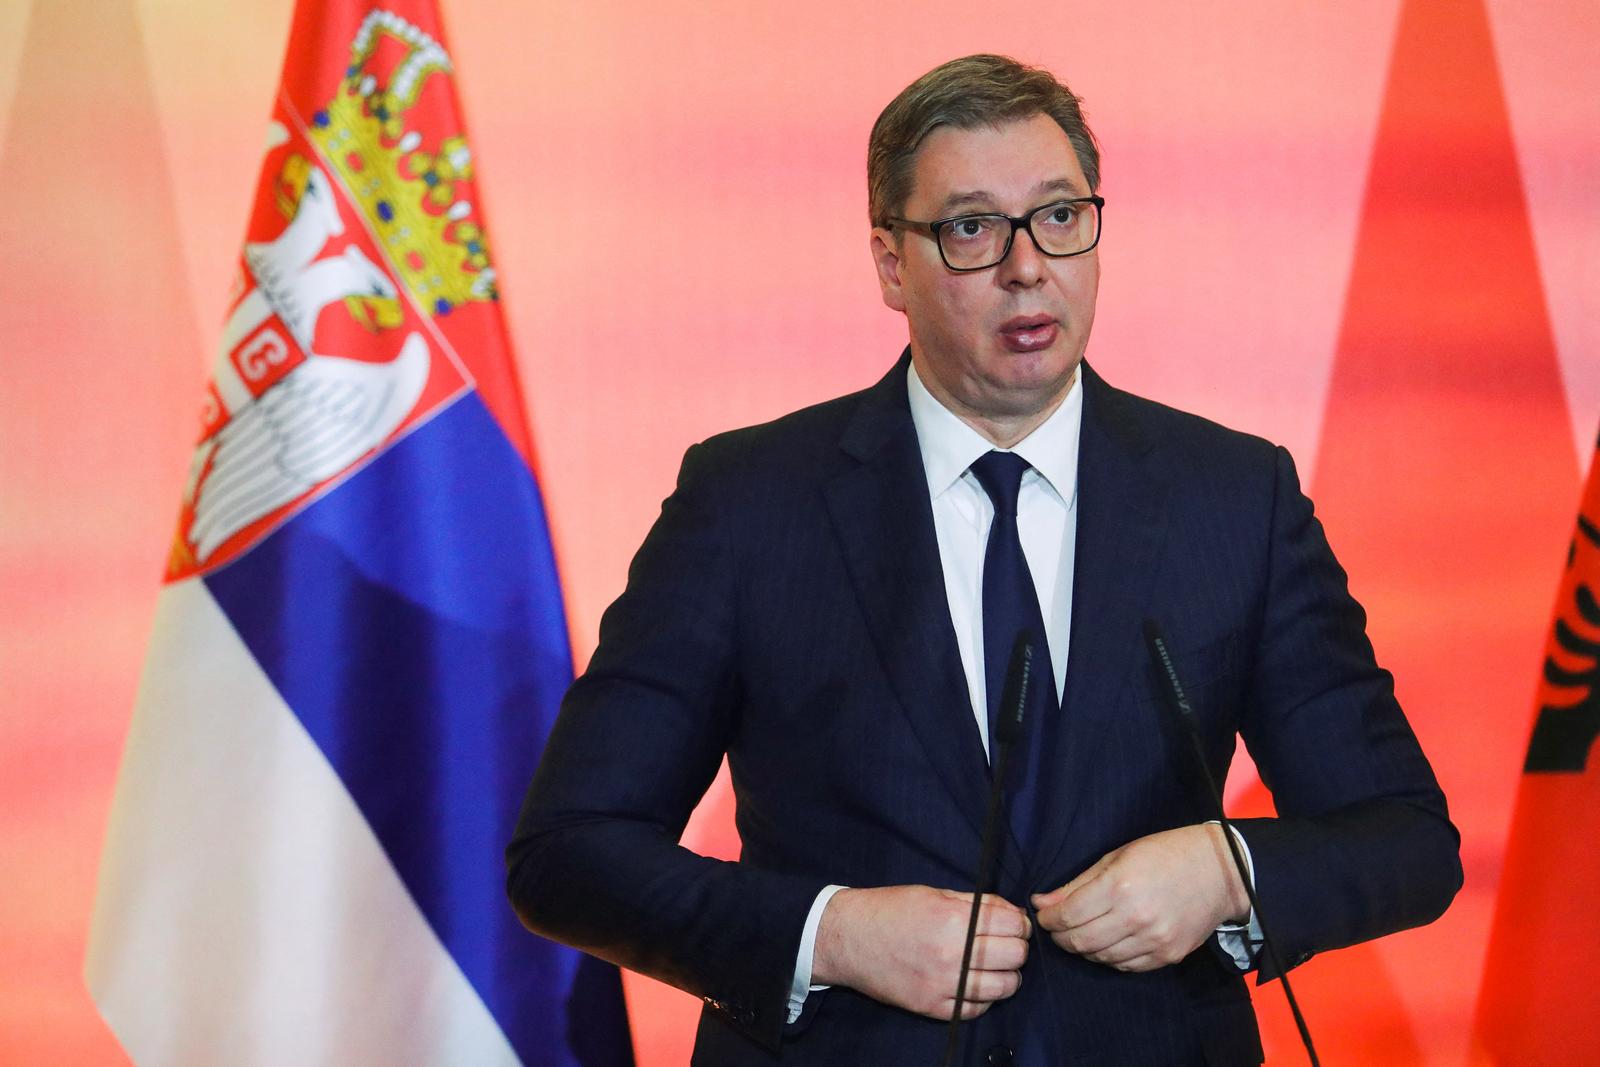 Serbia's President Aleksandar Vucic gestures during conference of the Open Balkan summit at the Palace of Brigades in Tirana, Albania December 21, 2021. REUTERS/Florion Goga Photo: Florion Goga/REUTERS